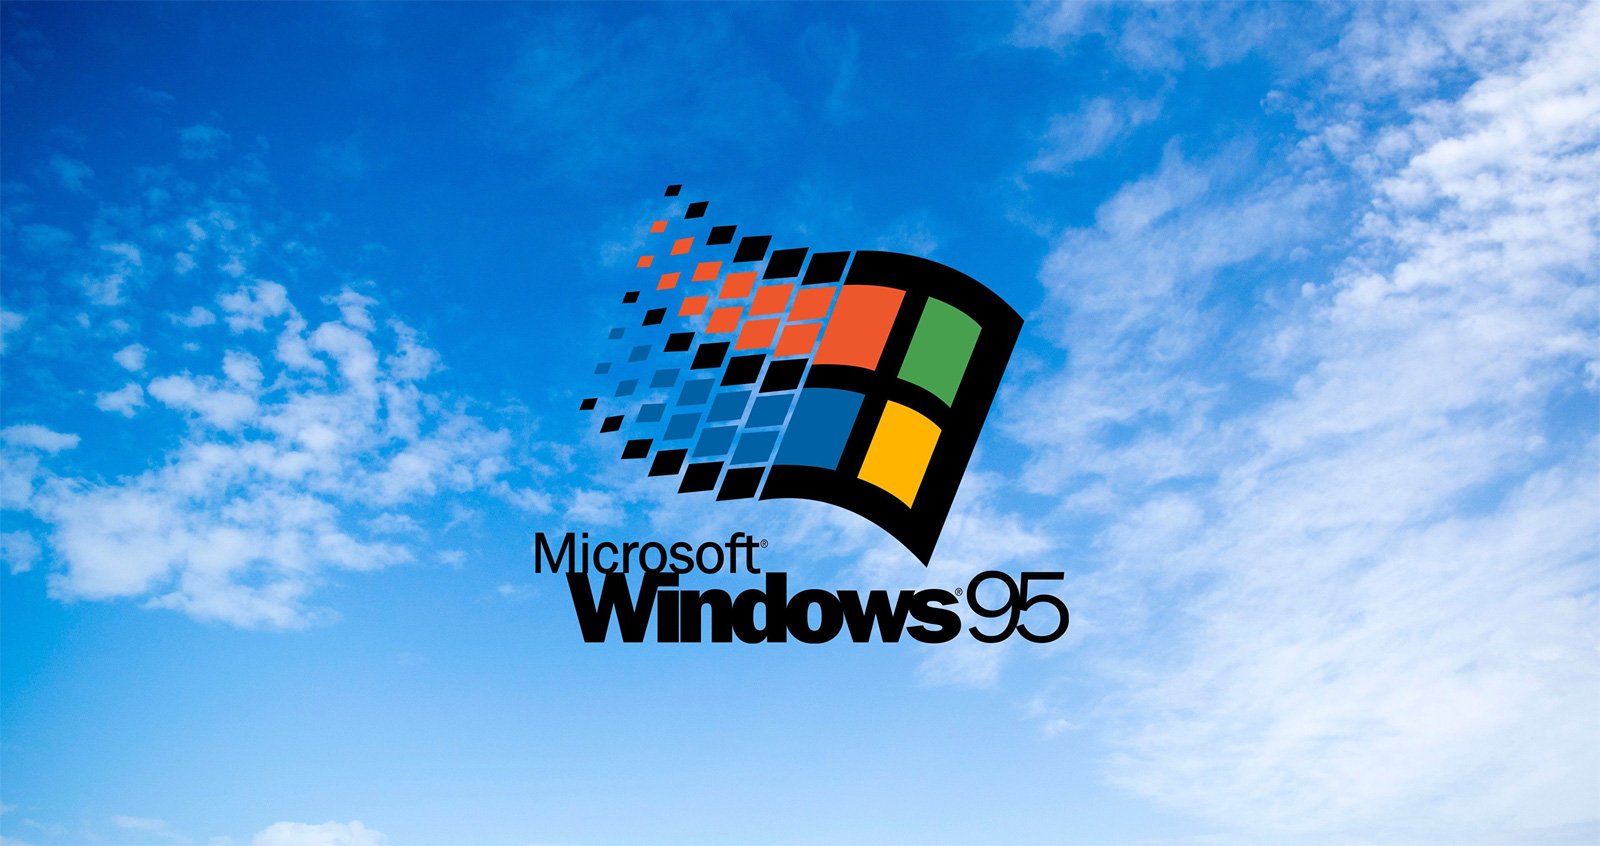 Windows 95 Easter egg discovered after being hidden for 25 years